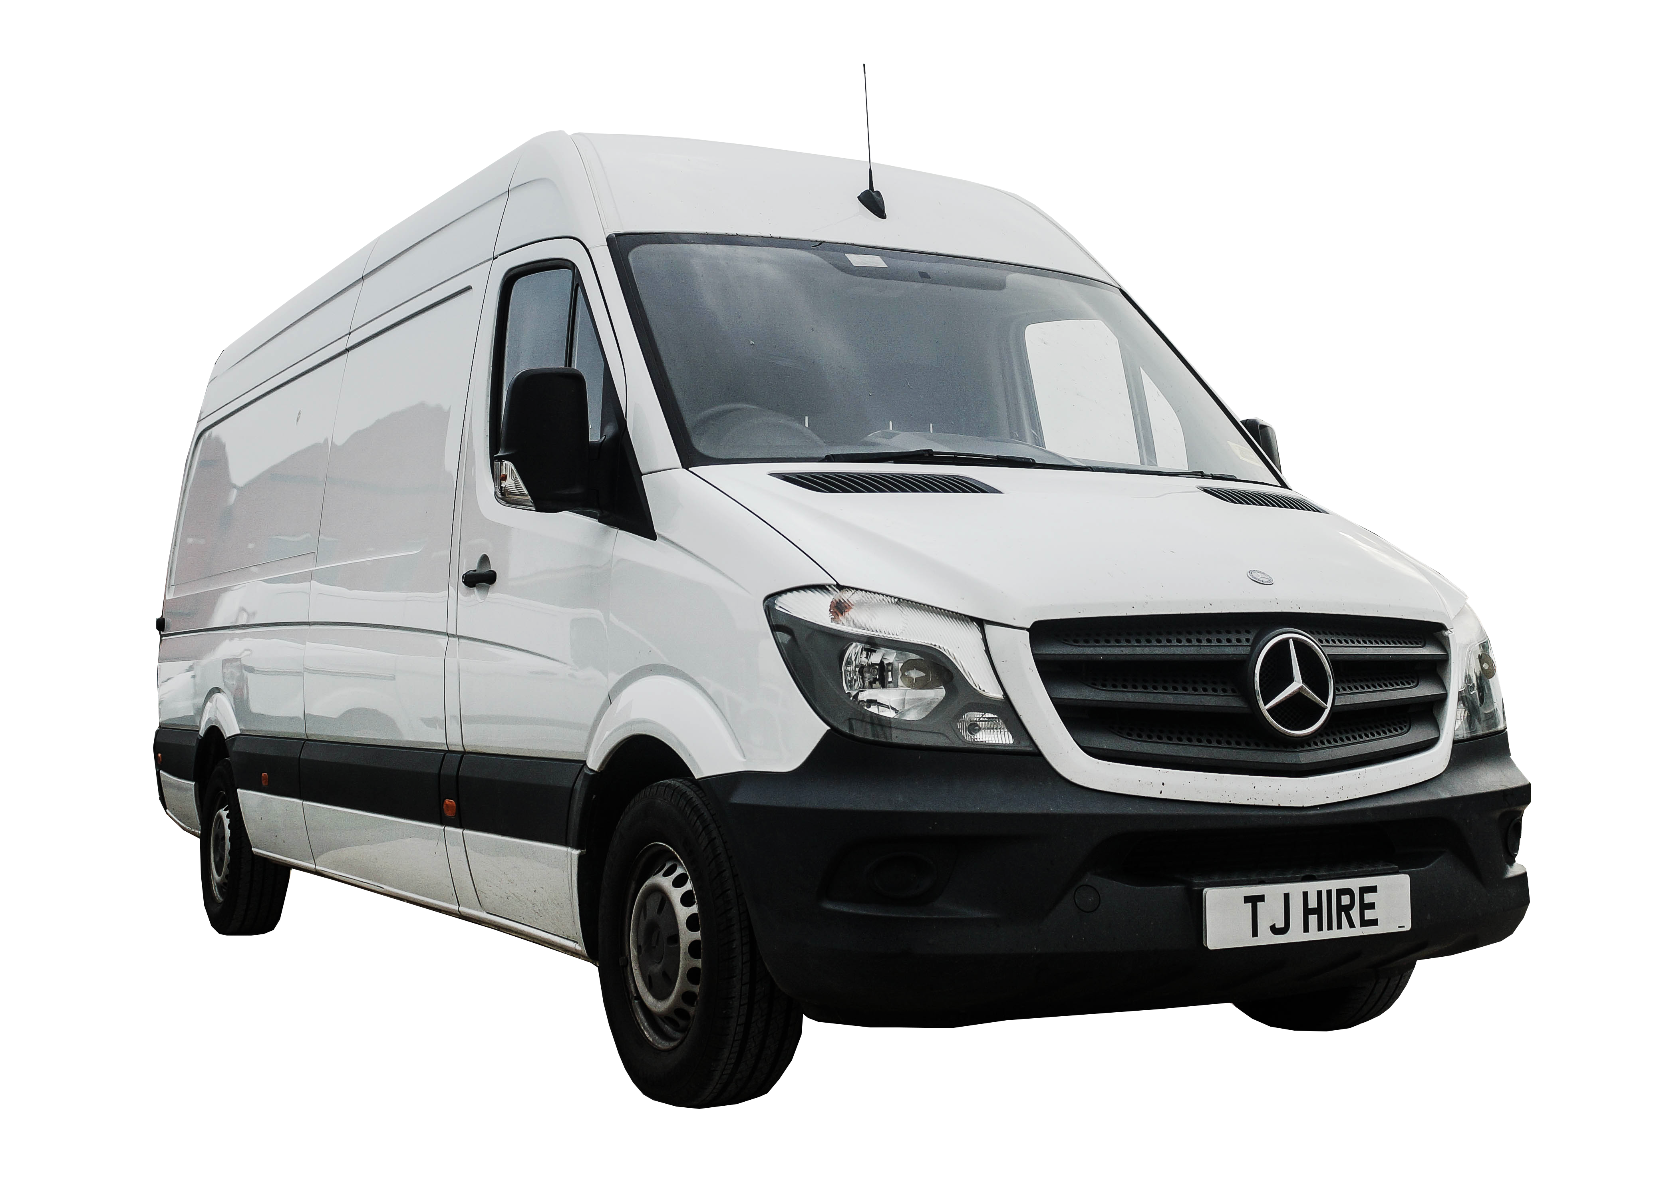 Sprinter extra long van for hire